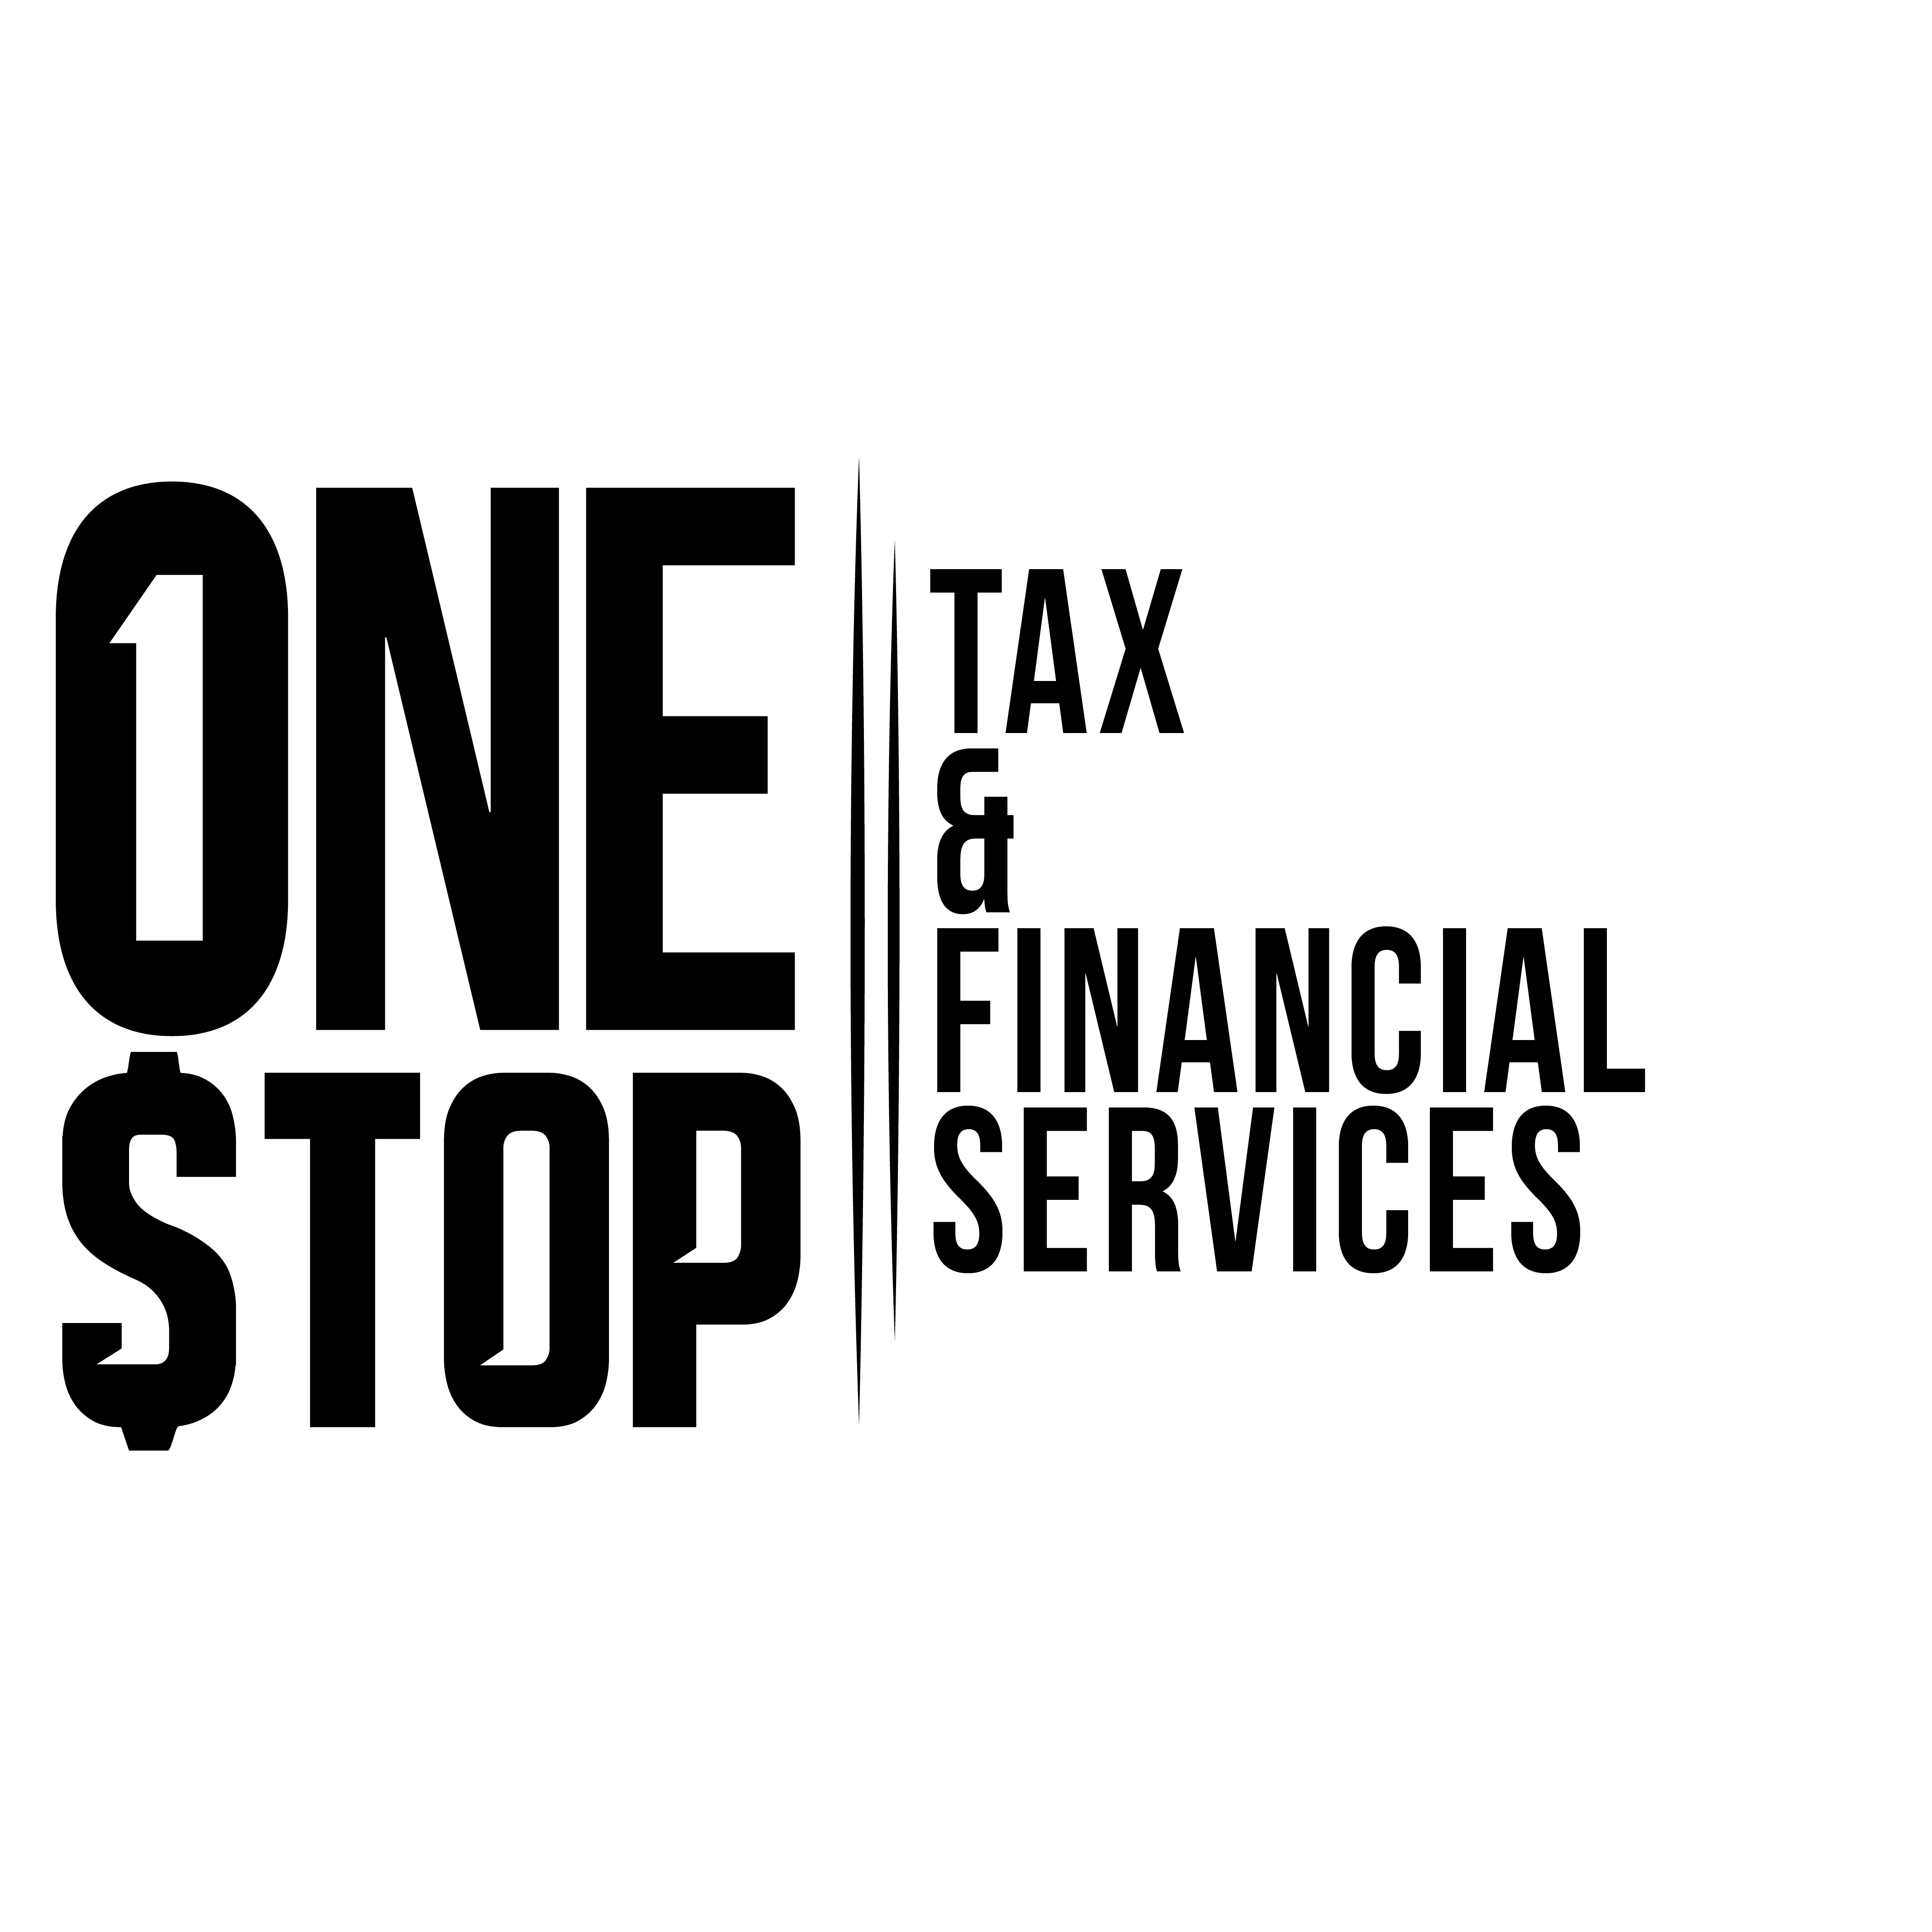 One Stop Tax Services